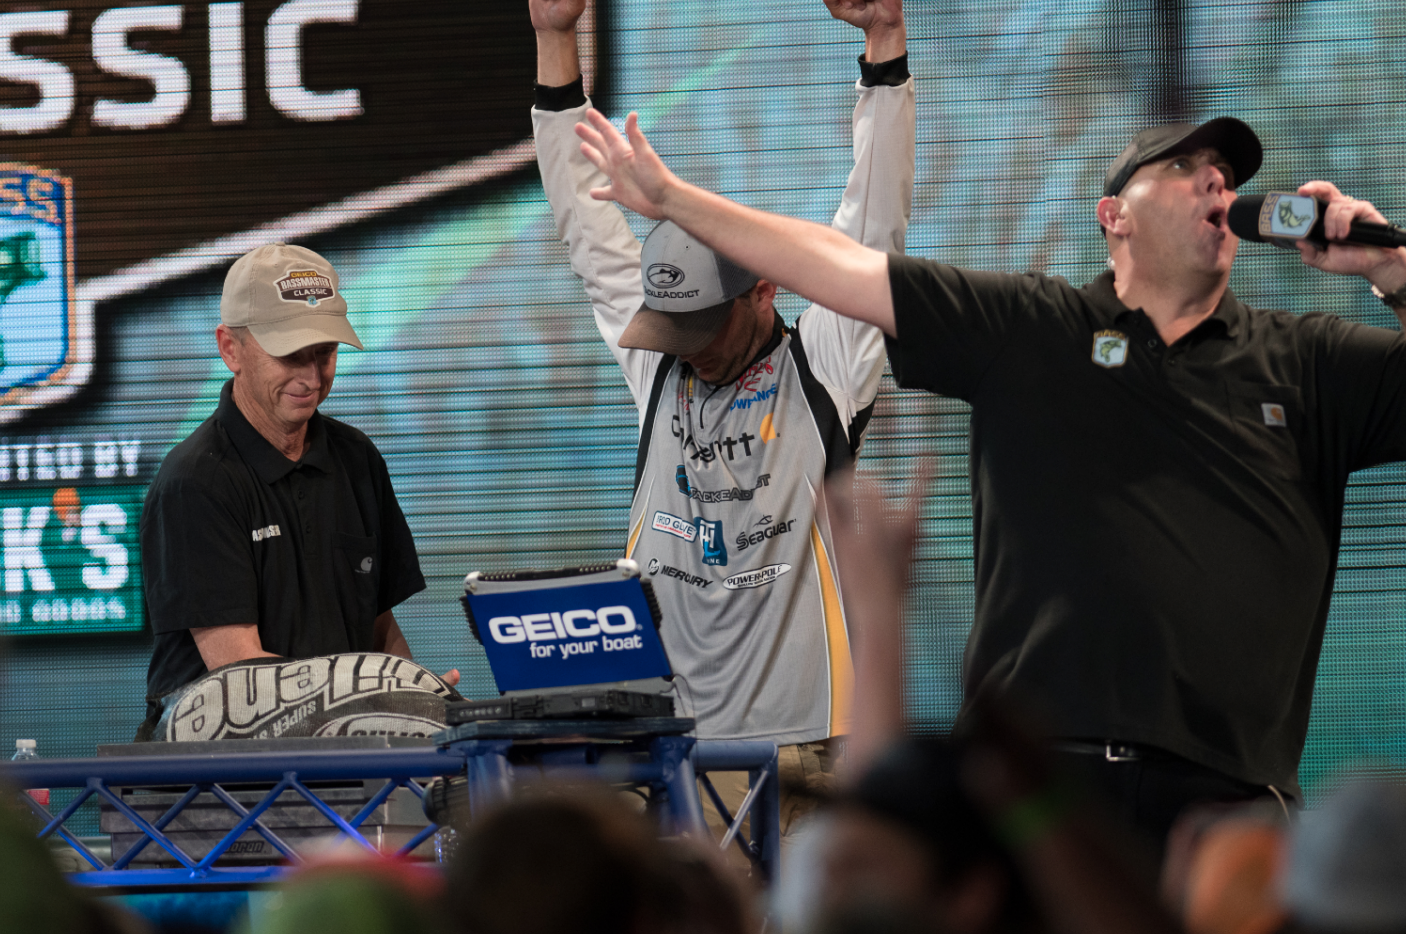 <h4<On-Stage or On-The-Water: The Future of Weigh-Ins</h4>
<B>The Bassmaster Texas Fest begs the question: Will on- the-water weigh-ins replace the stage?</b><BR>
For the past two years the Bassmaster Texas Fest and the Classic Bracket tournaments have used a new weigh-in format, calling on marshals (or judges) to weigh each of the competitorsâ keeper bass on the water. As a result, the BASSTrakk leaderboards were typically 100 percent accurate, and the majority of the fish were released immediately after being caught.<BR>
Missing was the excitement, hype, and dramatic reveal of on- stage weigh-ins.<BR>
Jordan Lee believes the idea behind the new format is a good one, but should never be used on the Elite Series. âI definitely see the good when it comes to fish care, but there are just too many variables when you are competing at the Elite level. When itâs a game of ounces, can you really trust 108 different marshals or competitors with different scales? Thereâs just too much on the line to not have everyone weigh on the same scale.â
